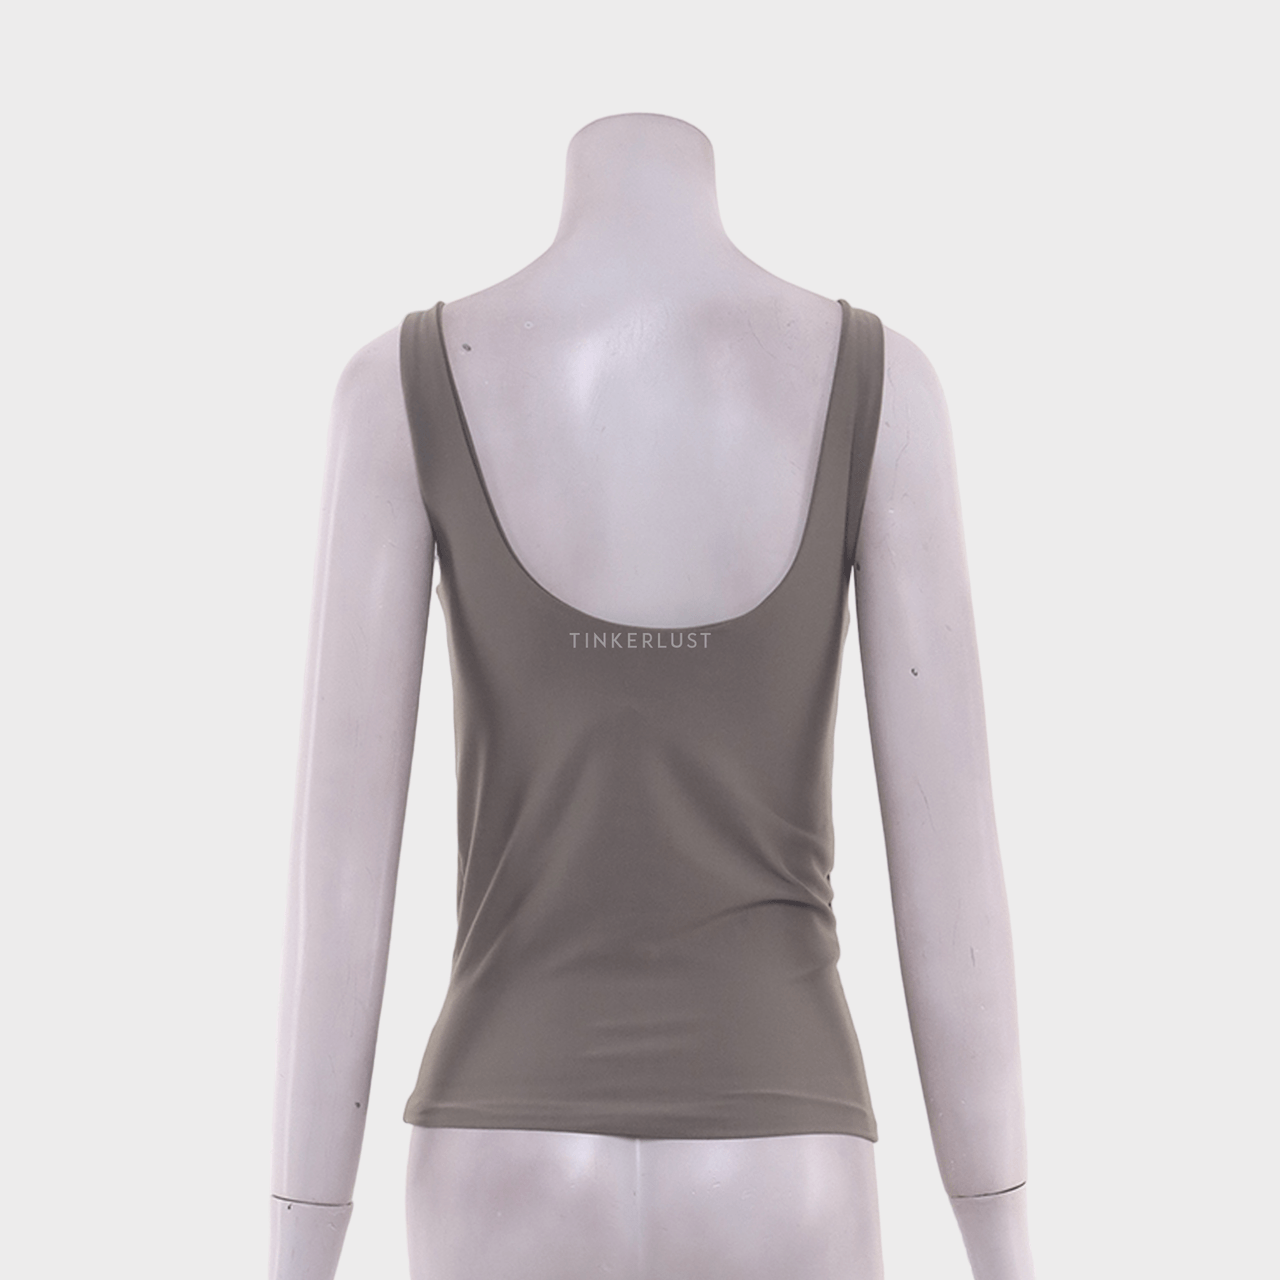 Private Collection Grey Sleeveless